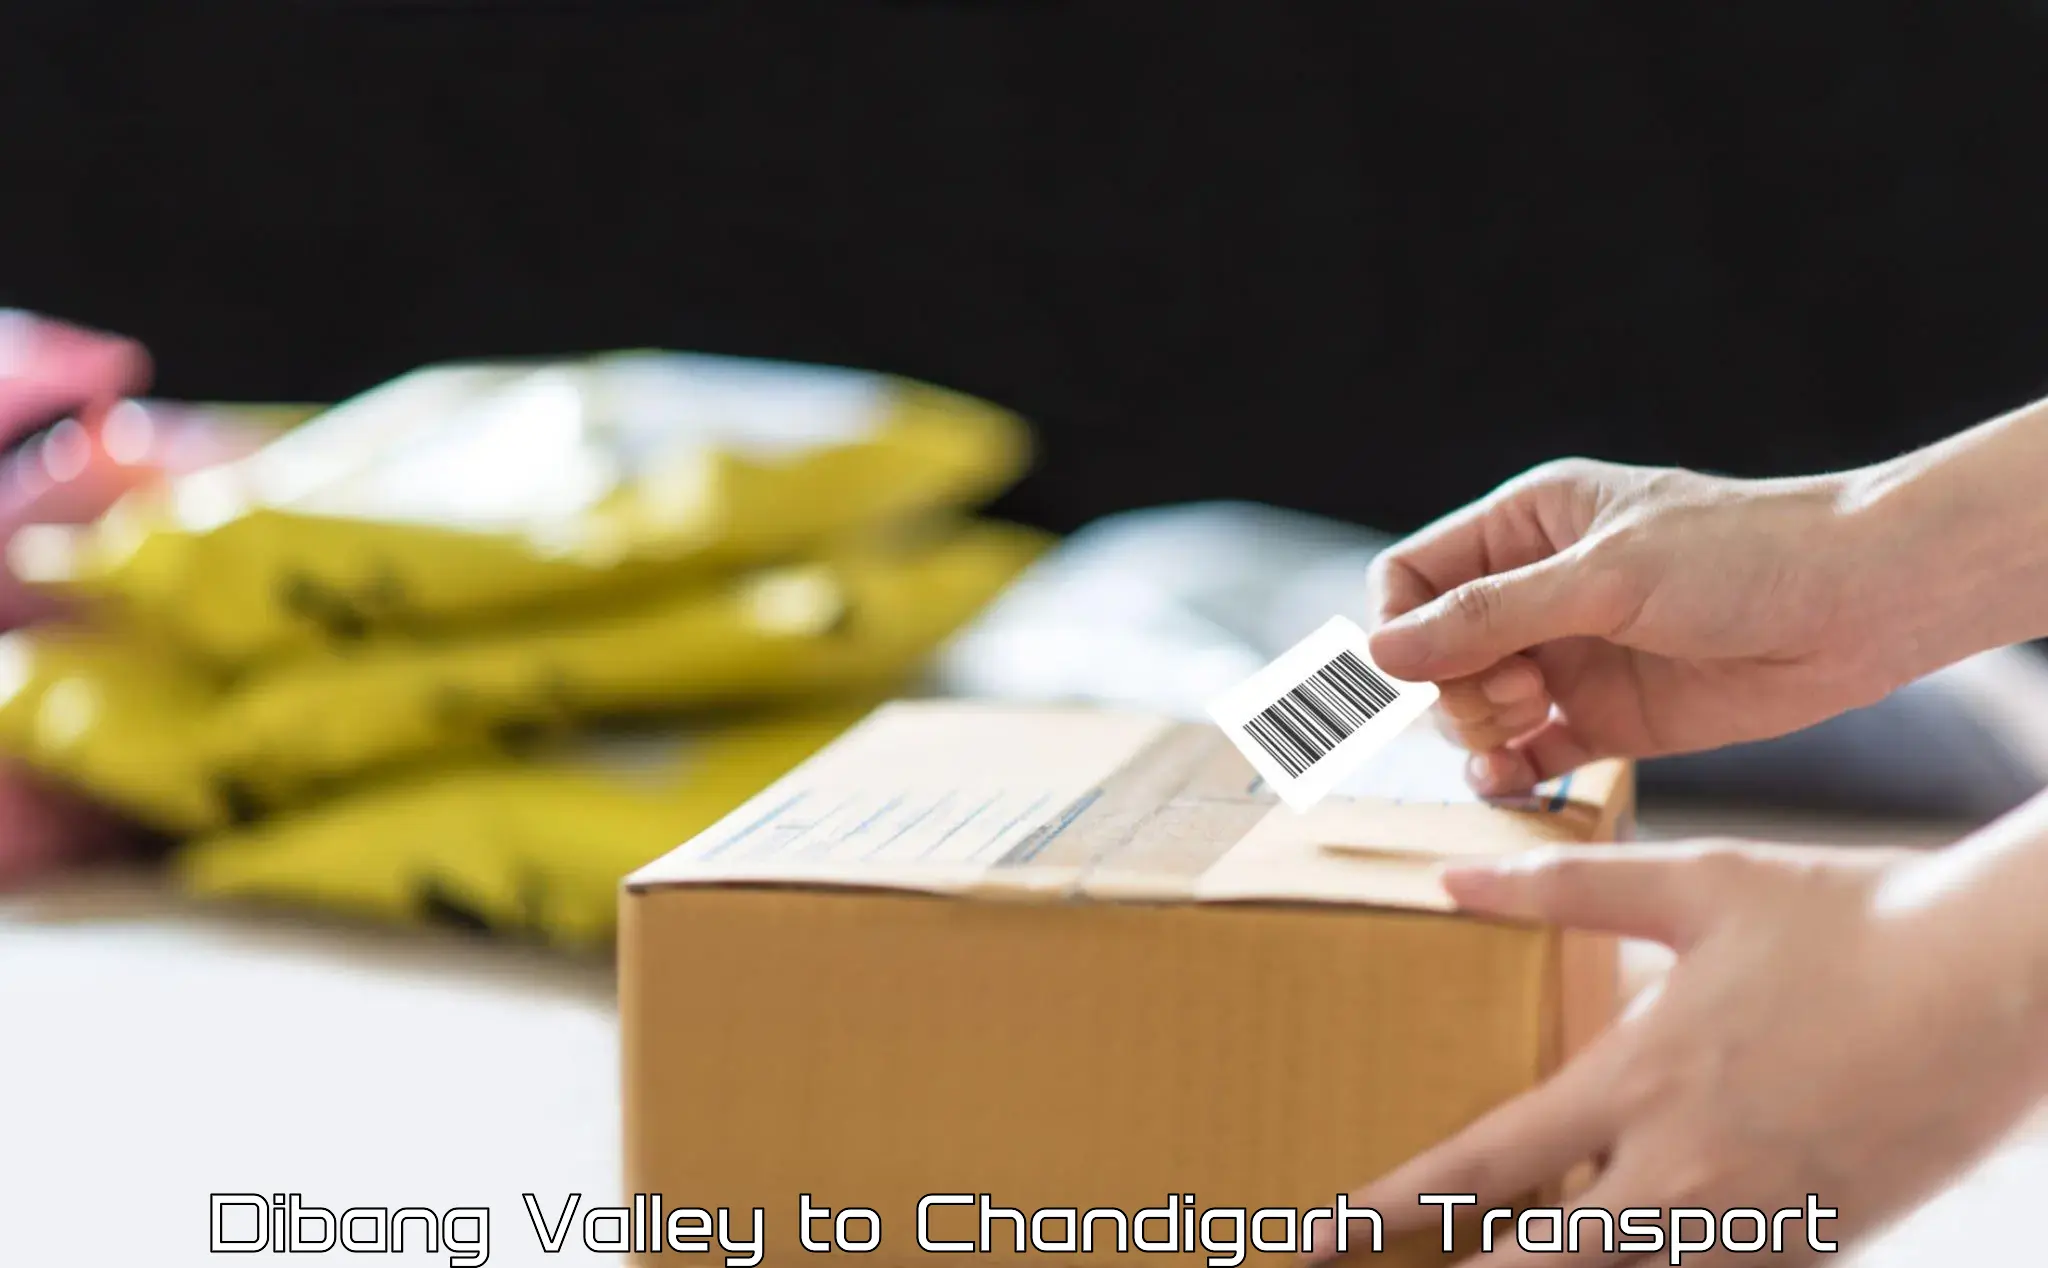 Online transport service Dibang Valley to Chandigarh